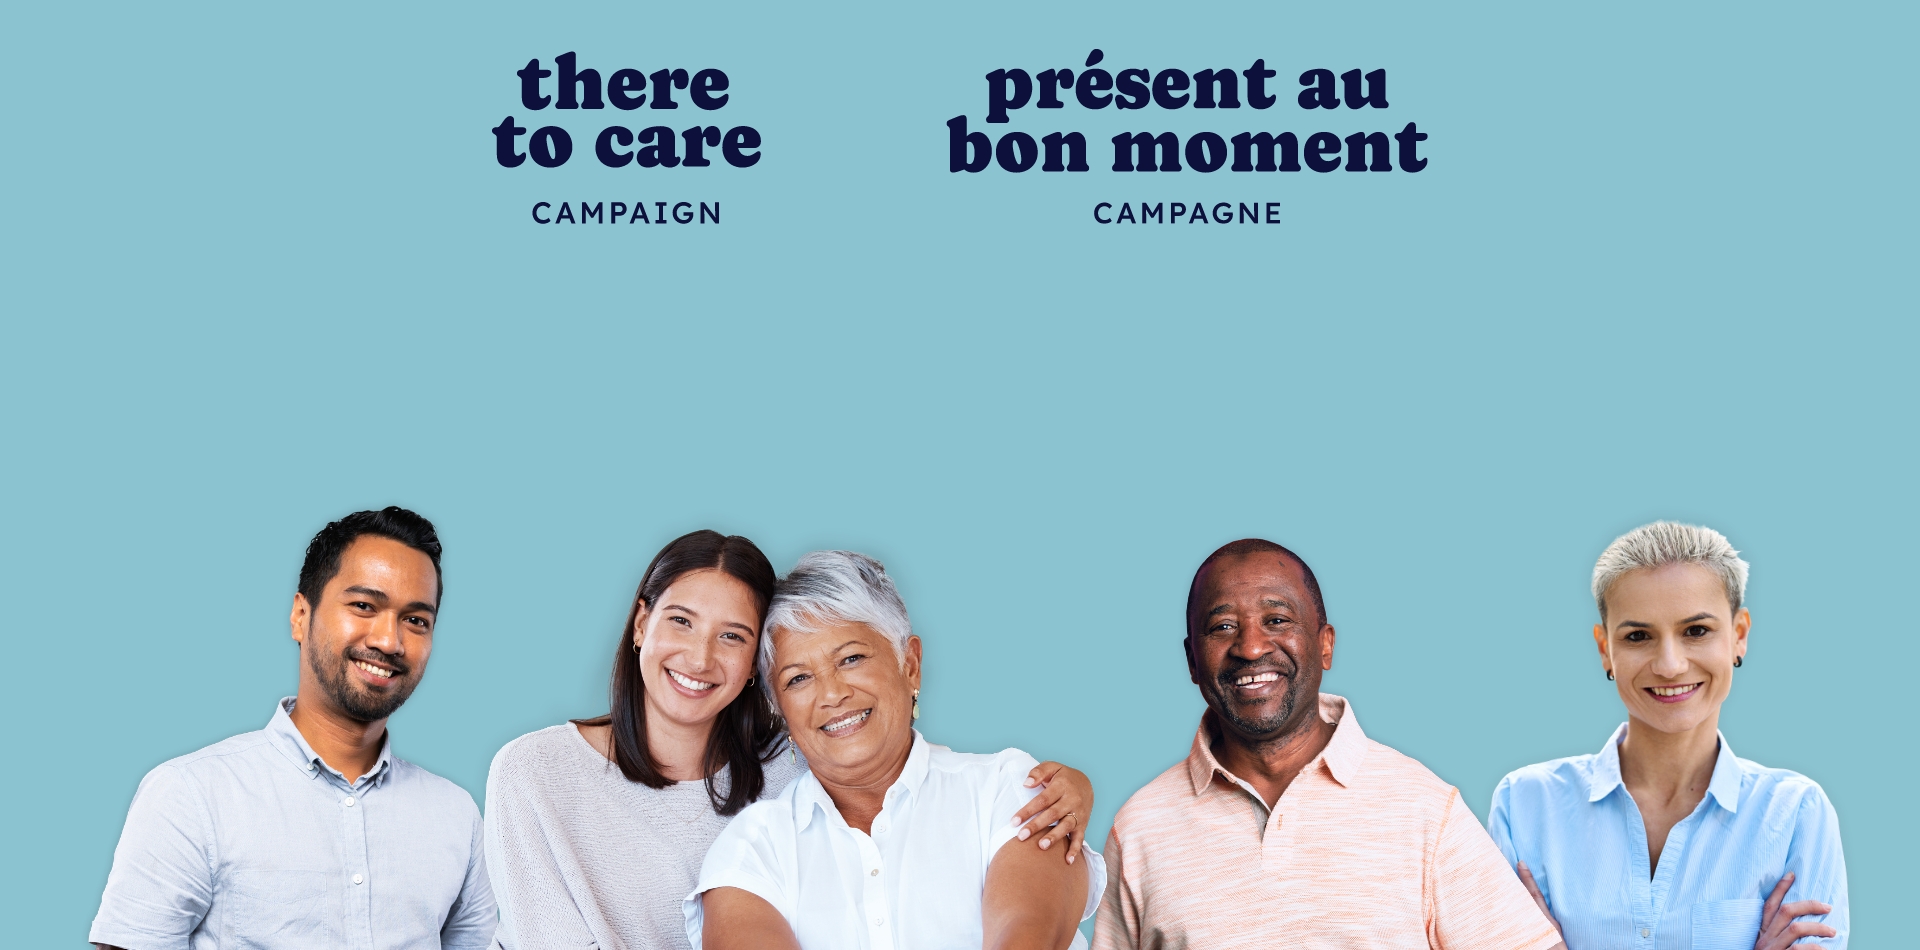 Images of a diverse group of people with the logo "there to care campaign" in English and "présent au bon moment" in French